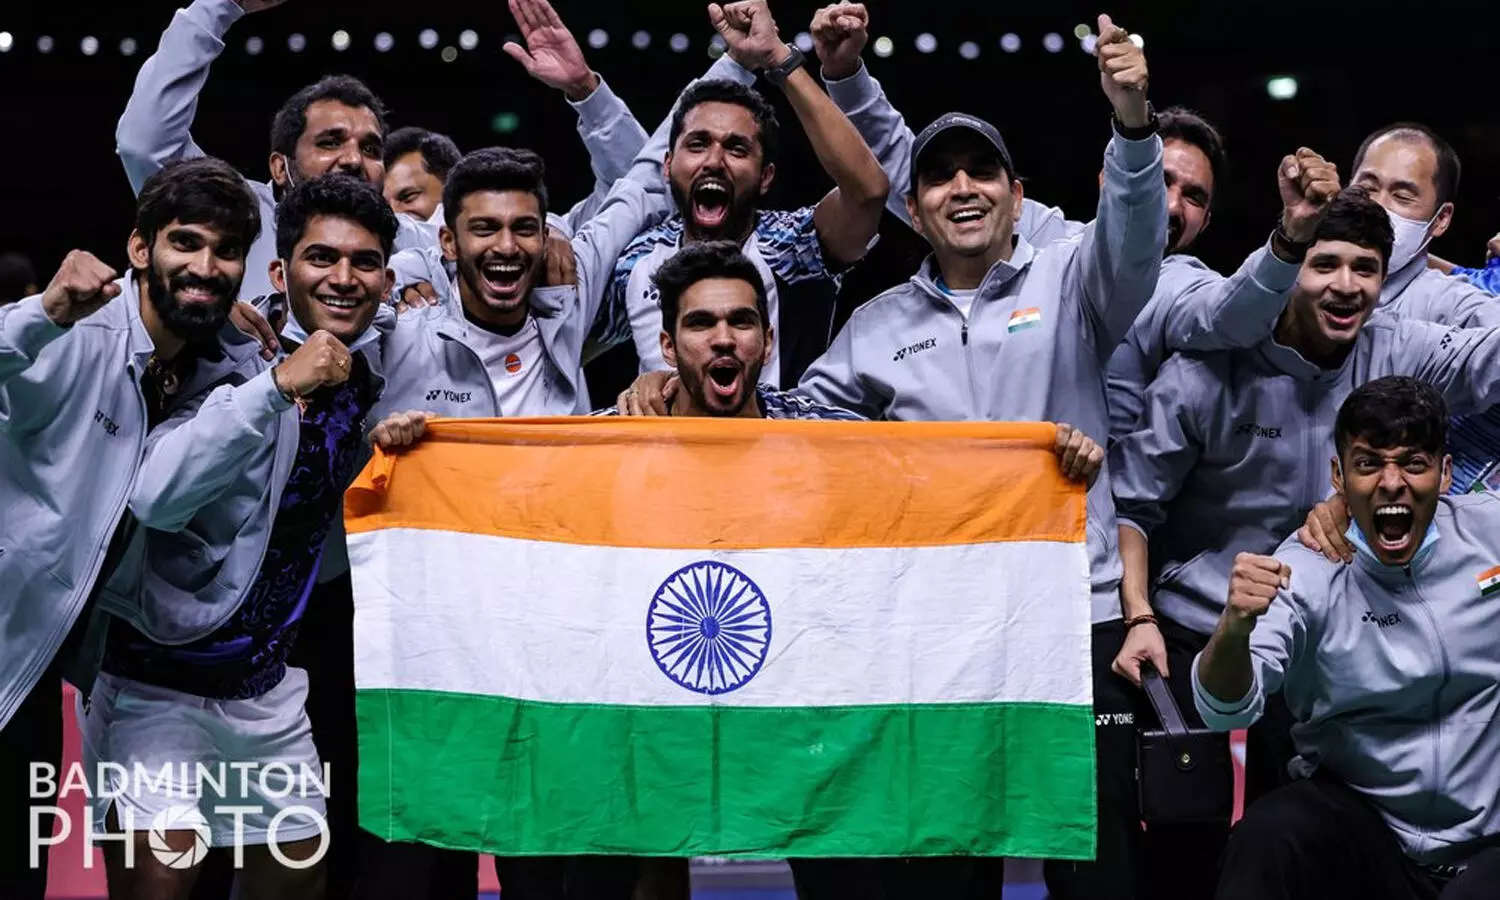 Twitter celebrates Indias historic entry into the final of Thomas Cup 2022